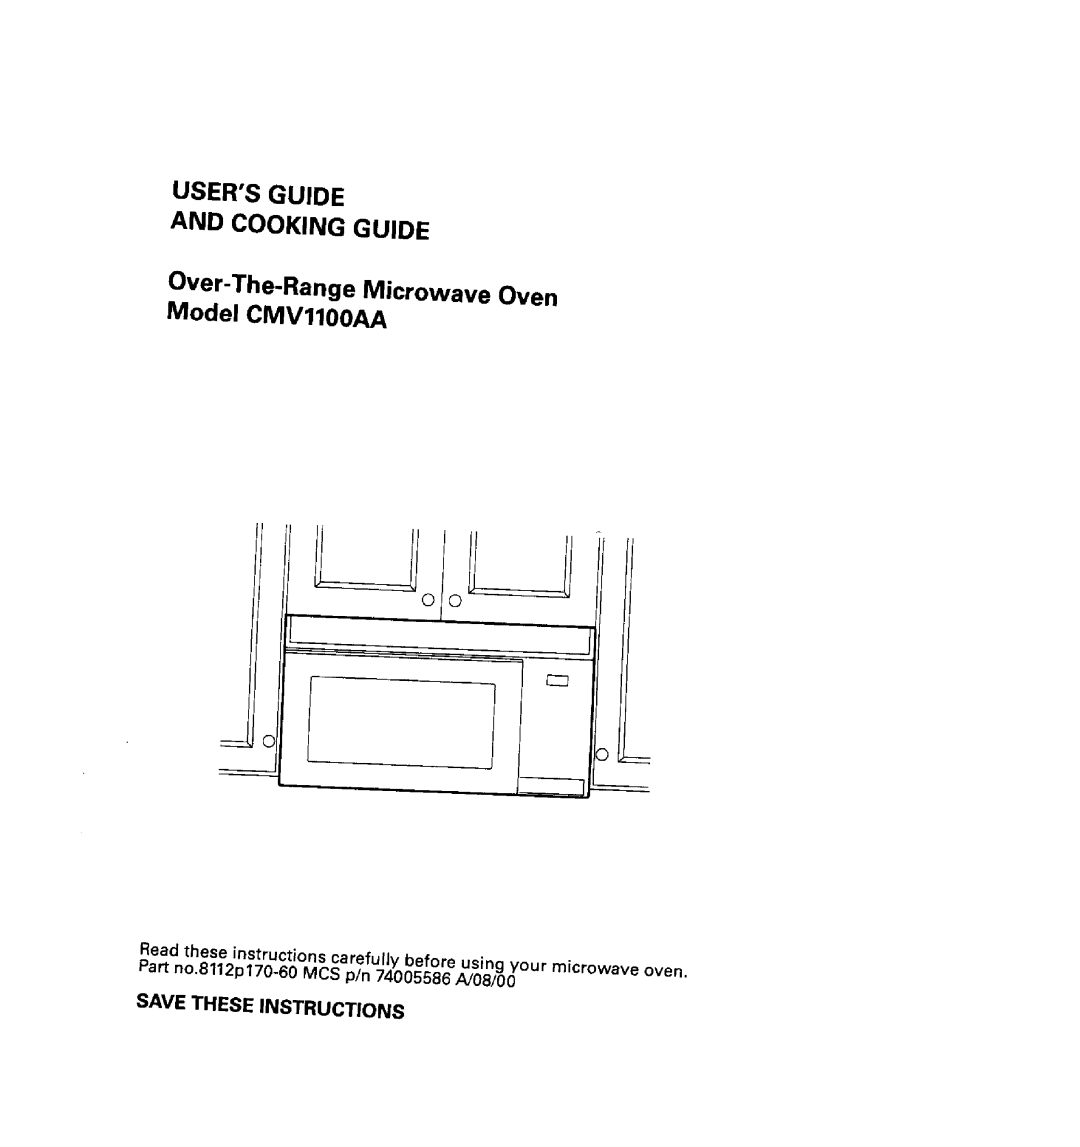 Maytag CMV1100AA manual Save These Instructions, Usersguide And Cooking Guide 